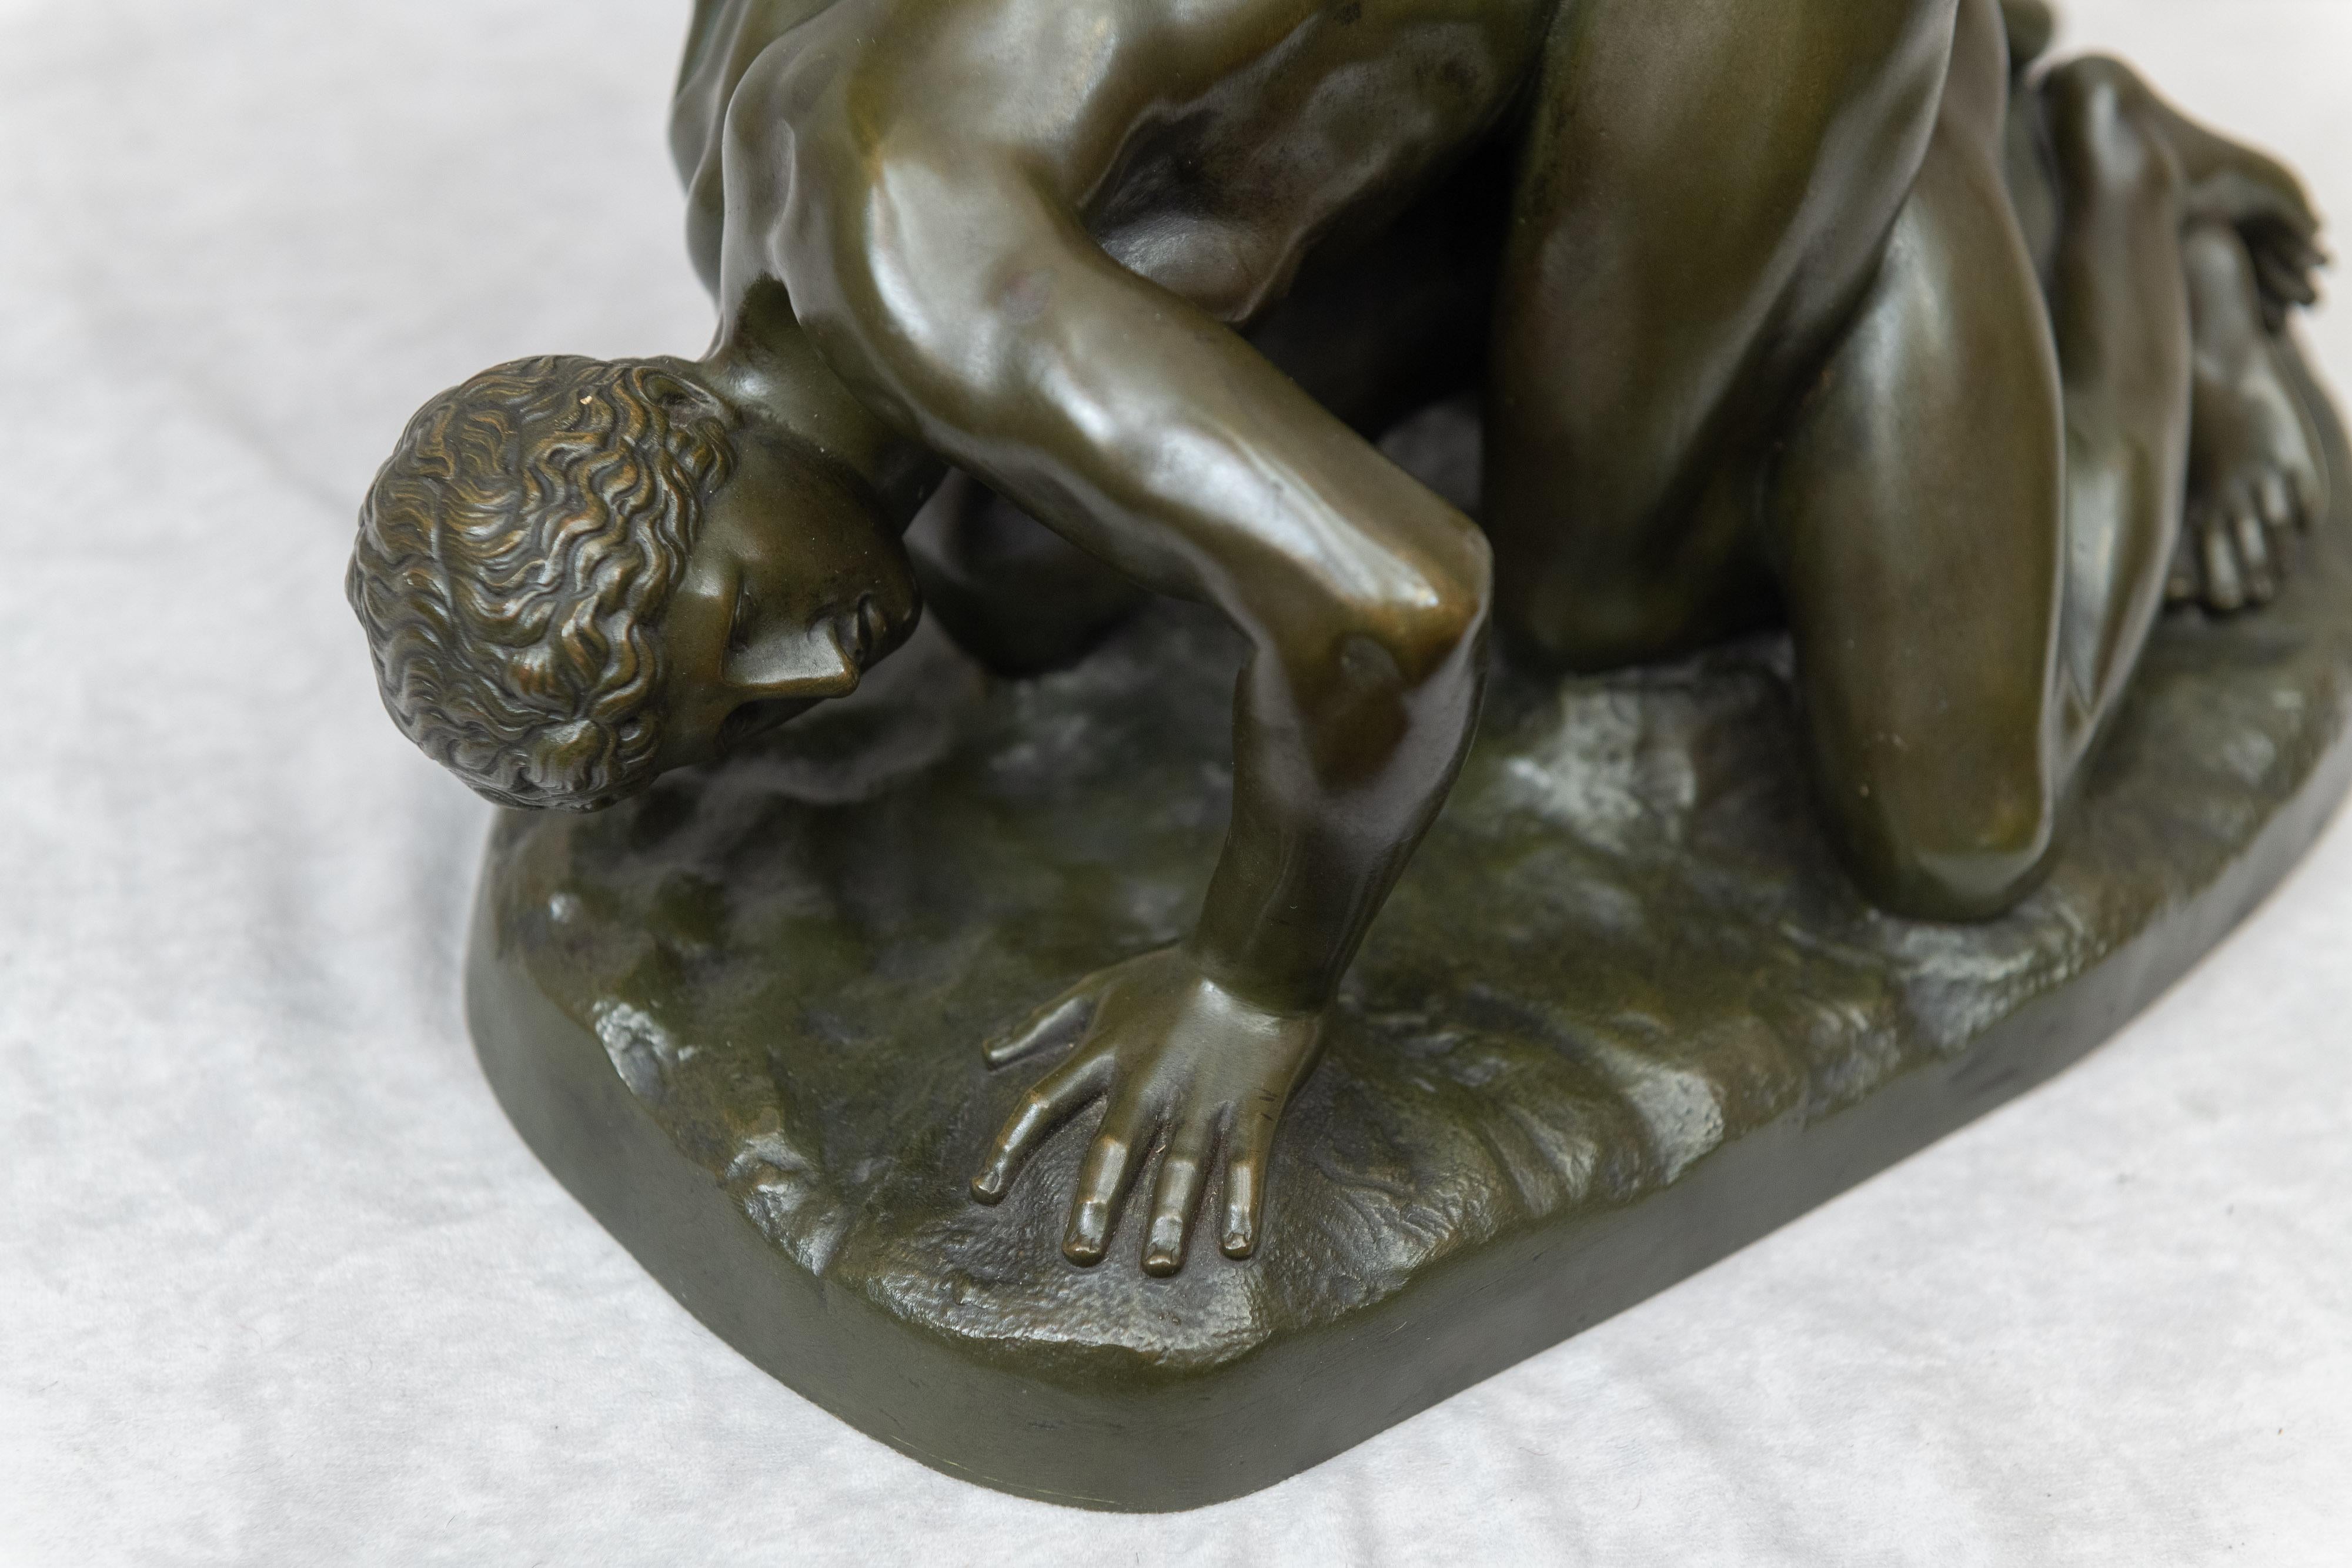 This is a very fine example of the classical bronze 'The Wrestlers